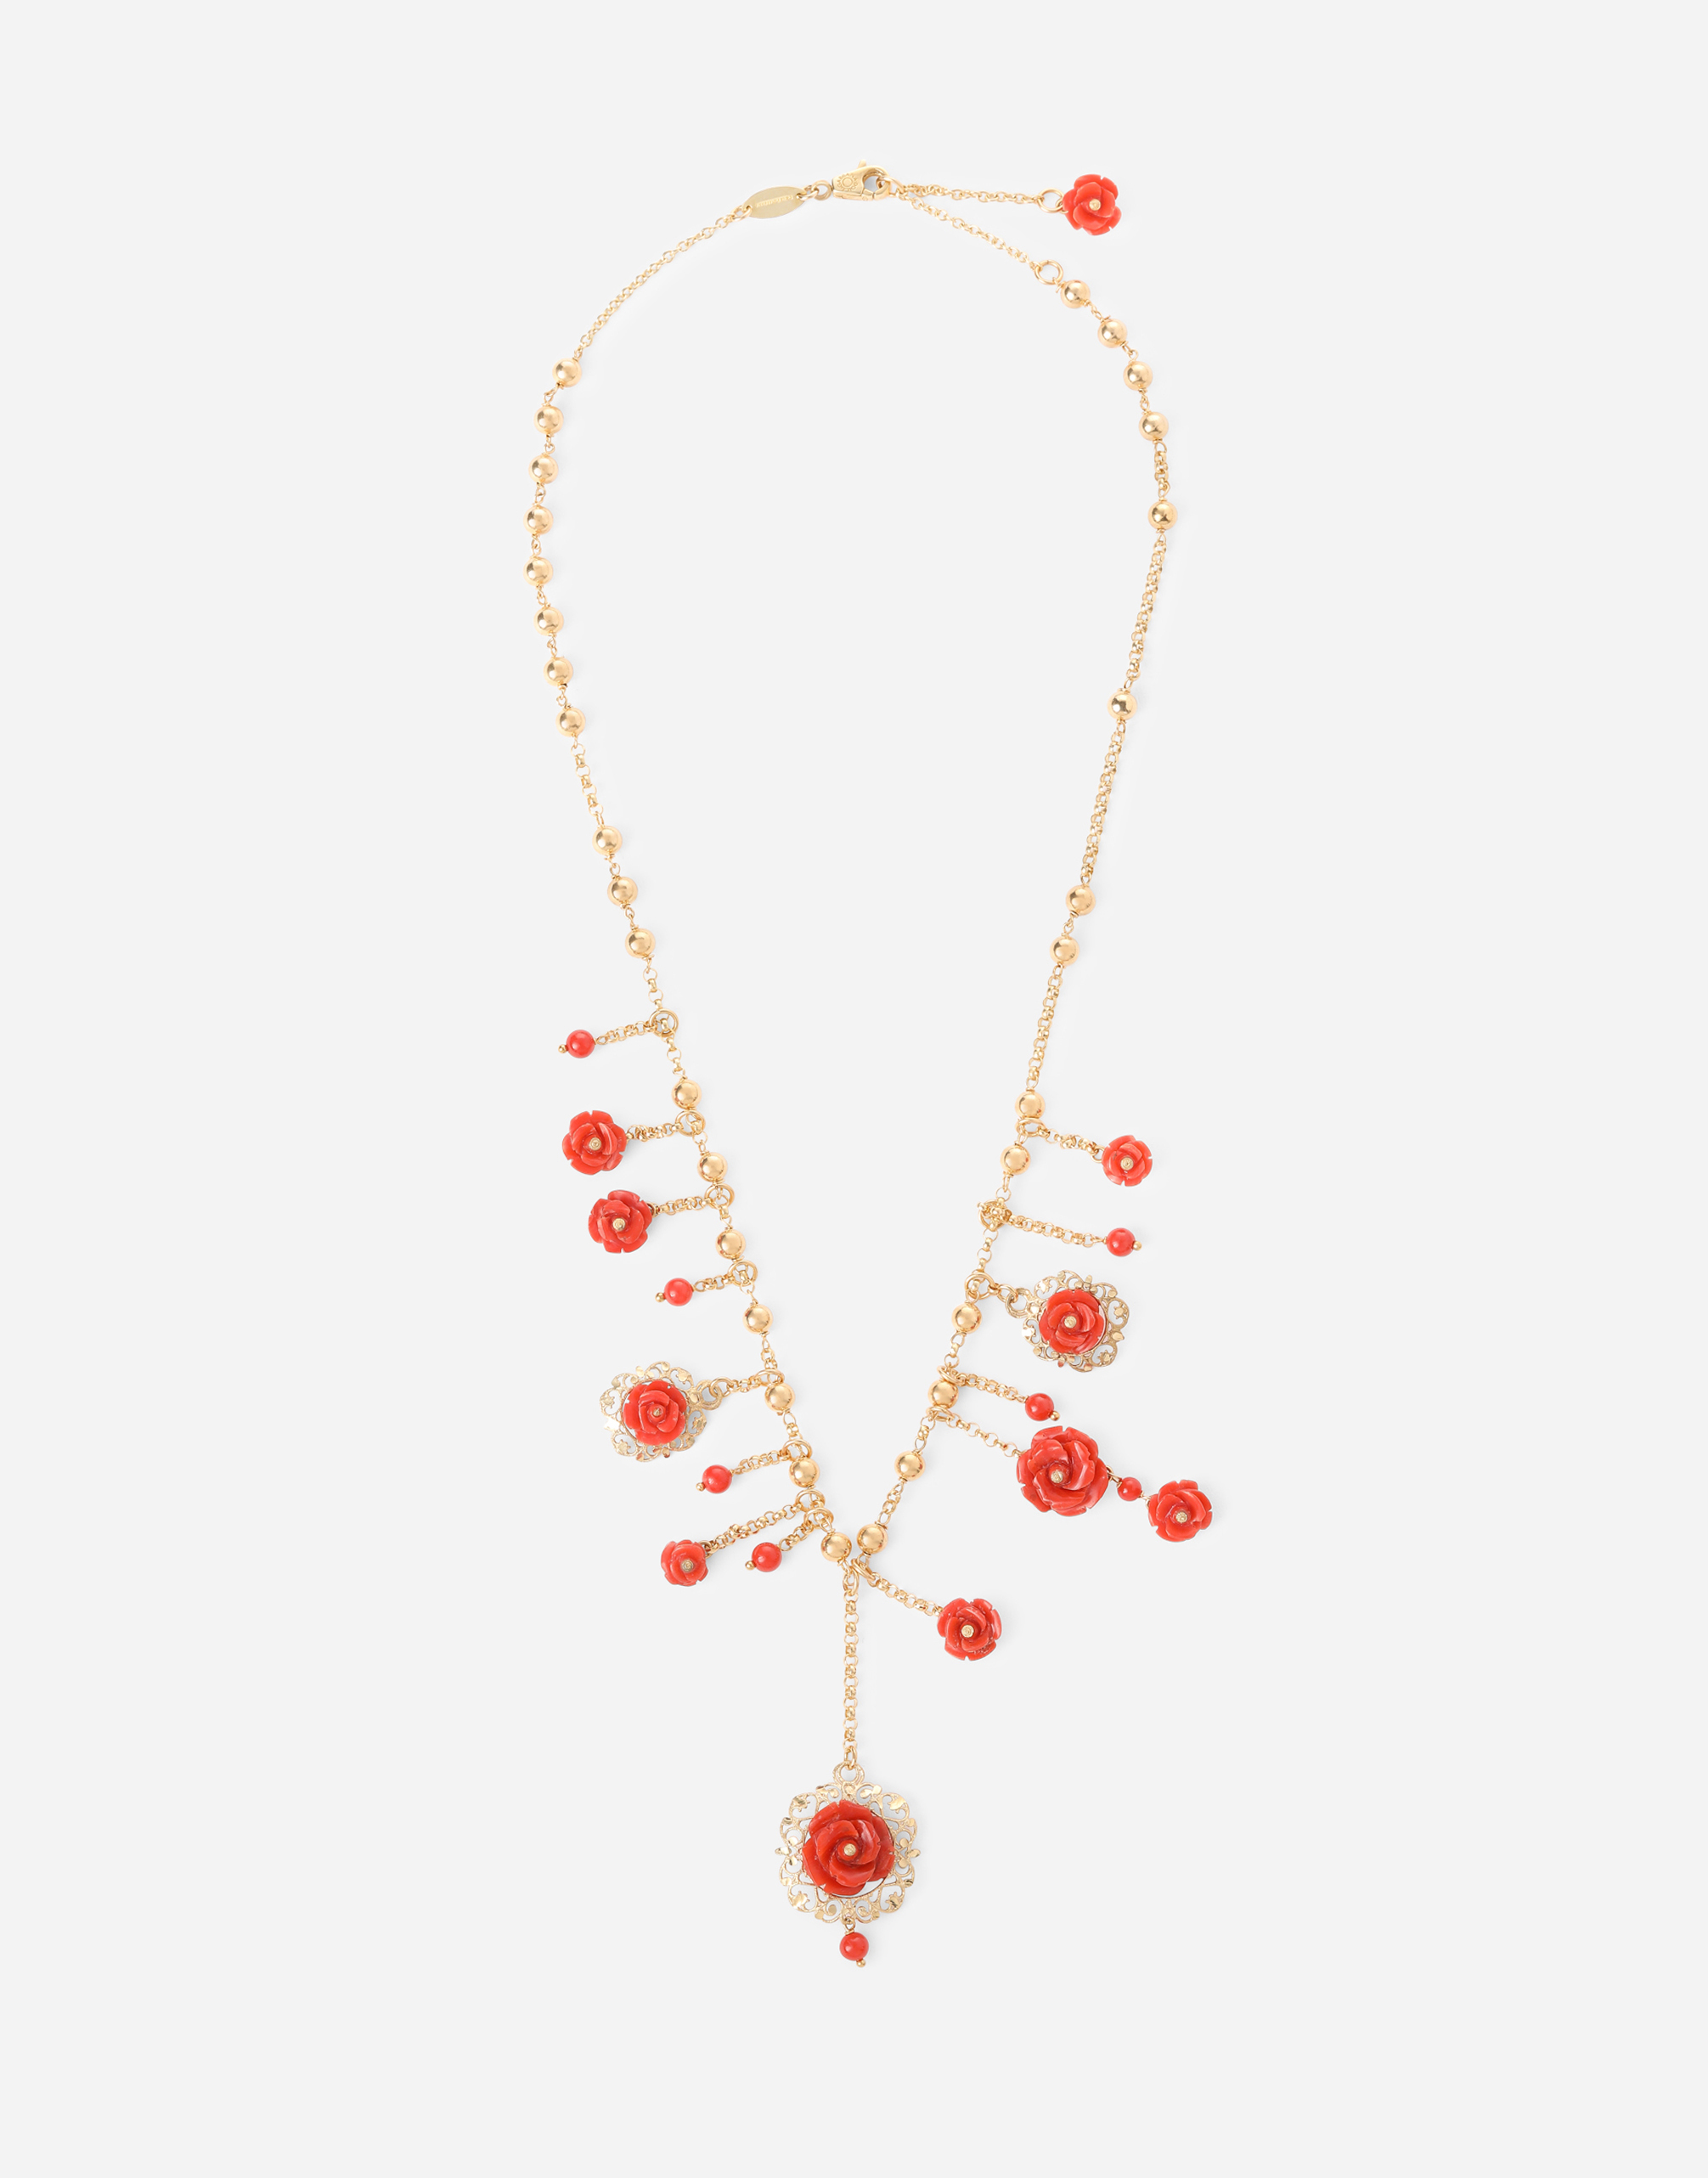 Coral necklace in yellow 18kt gold with coral rose in Gold